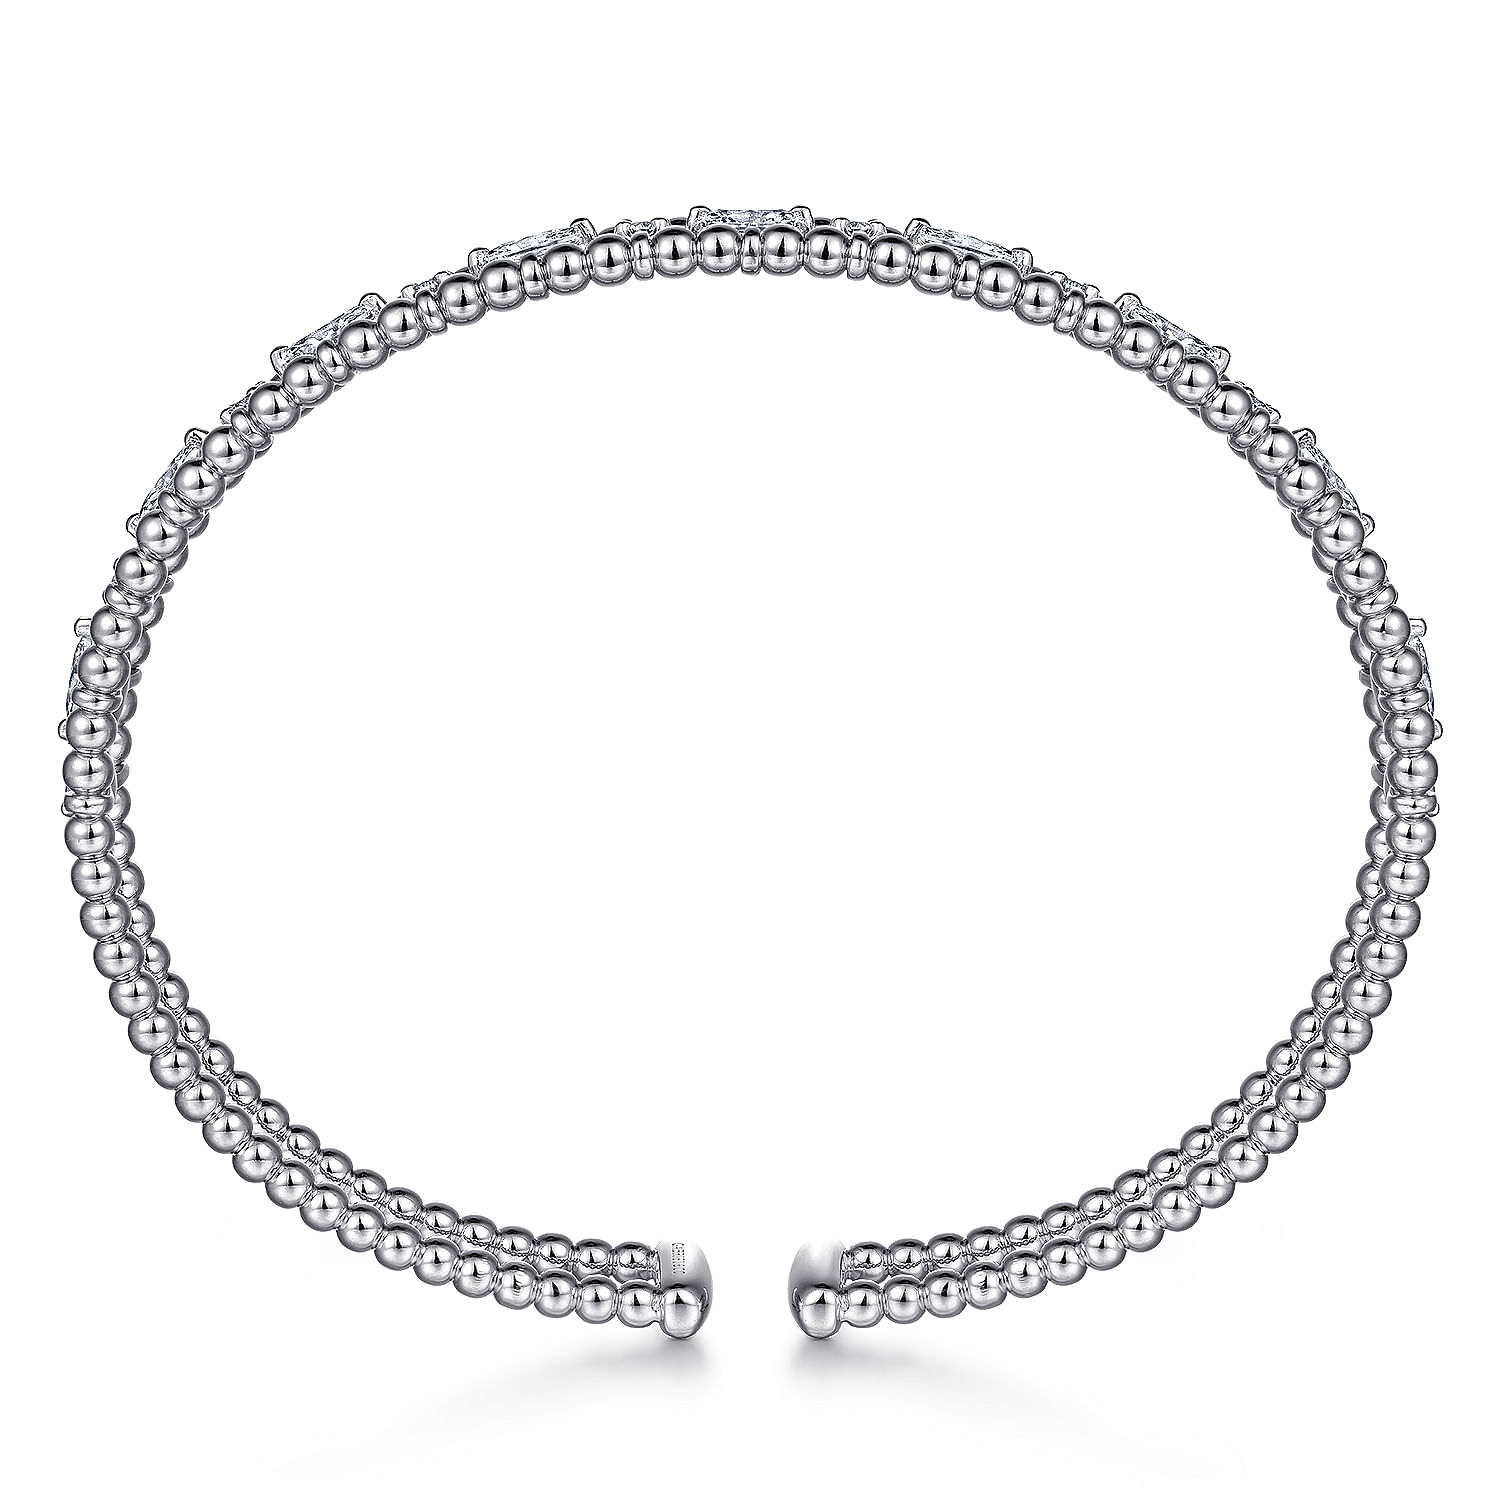 14K White Gold Bujukan Cuff Bracelet with Marquise and Round Diamonds